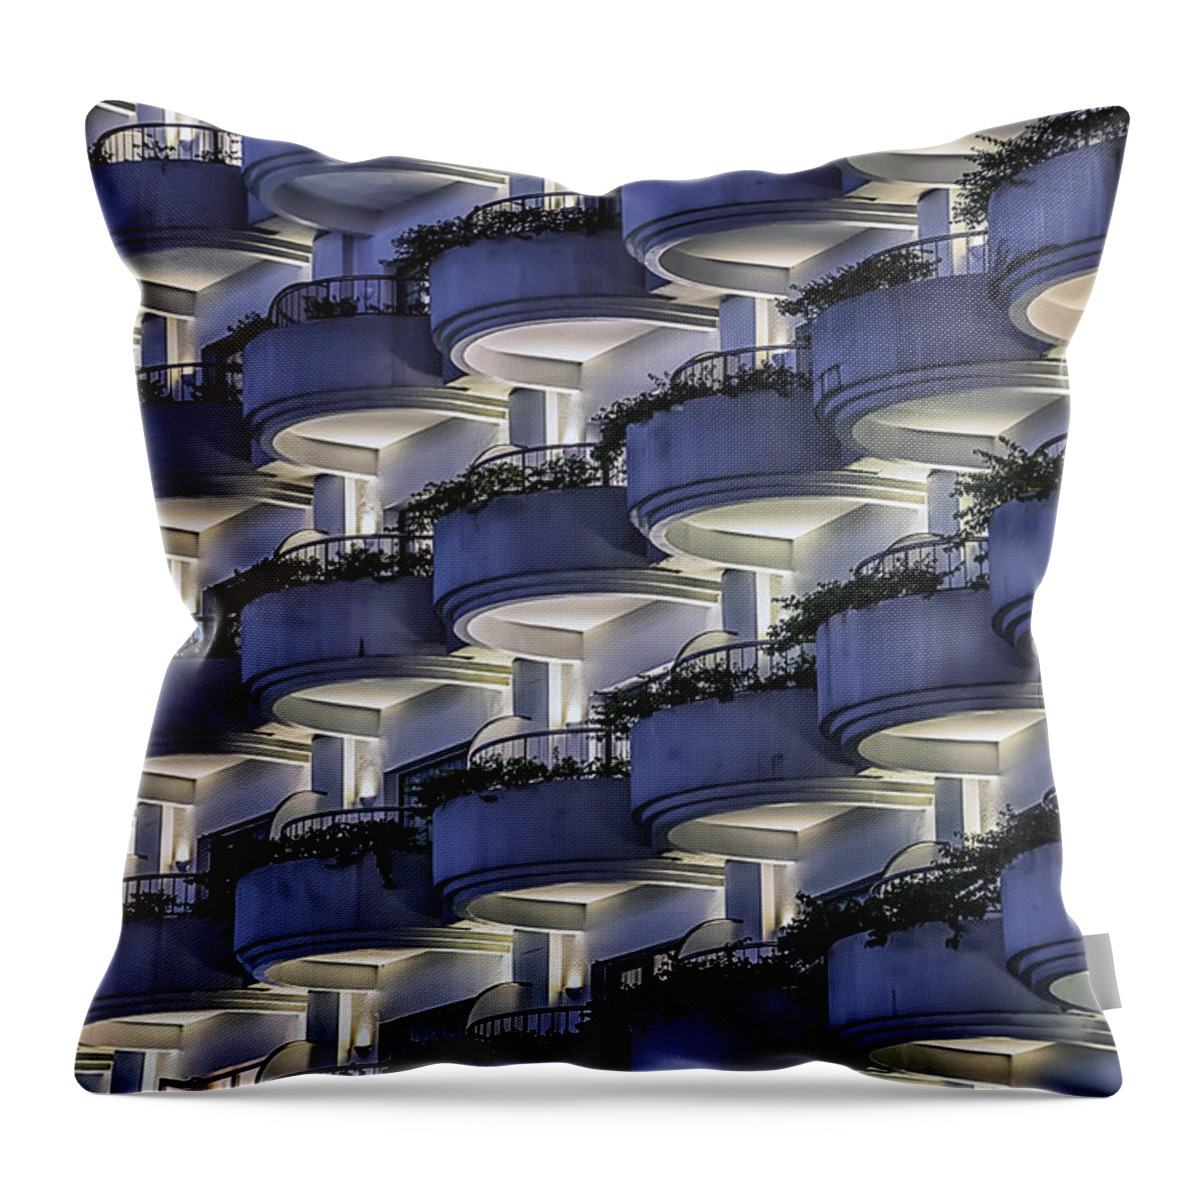 Apartment Throw Pillow featuring the photograph Rounds Balconies by Manjik Pictures